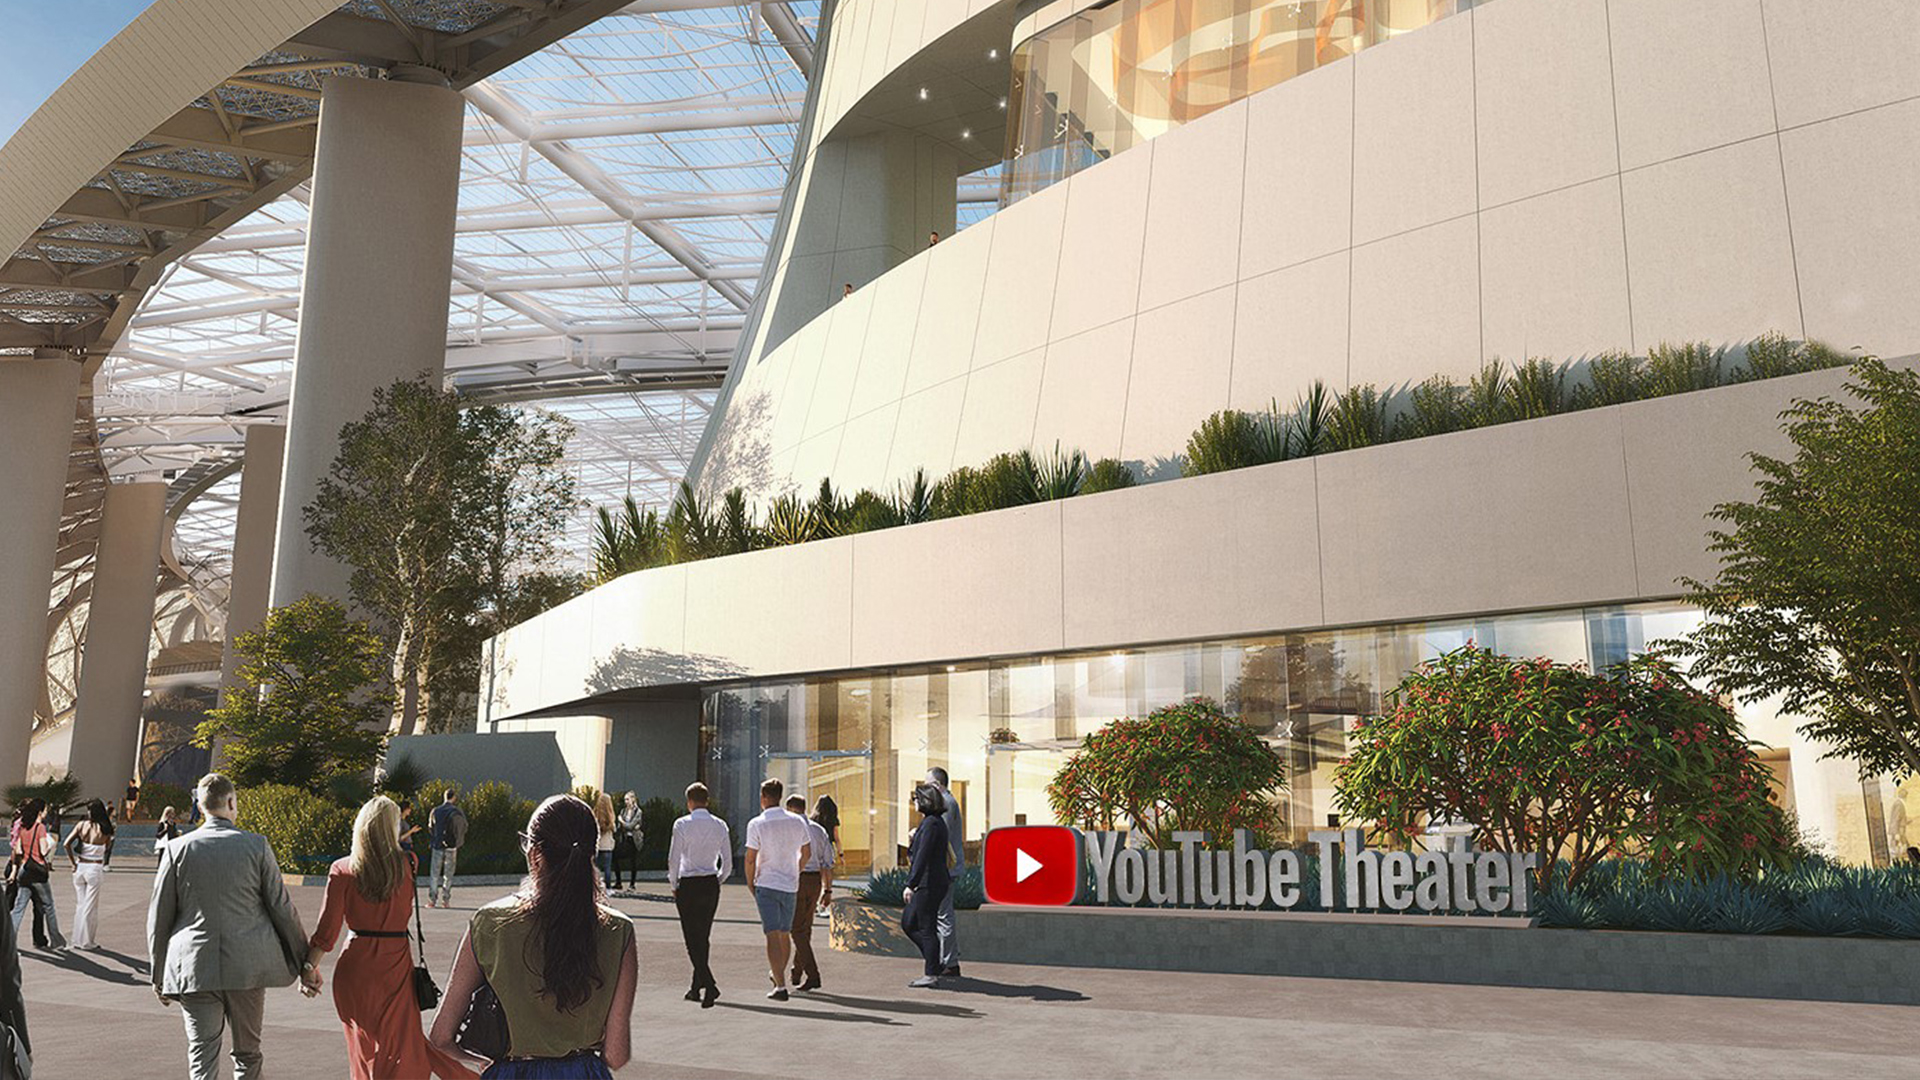 YouTube's New Theater Coming To Inglewood Could Open Up Opportunities For Its Creators